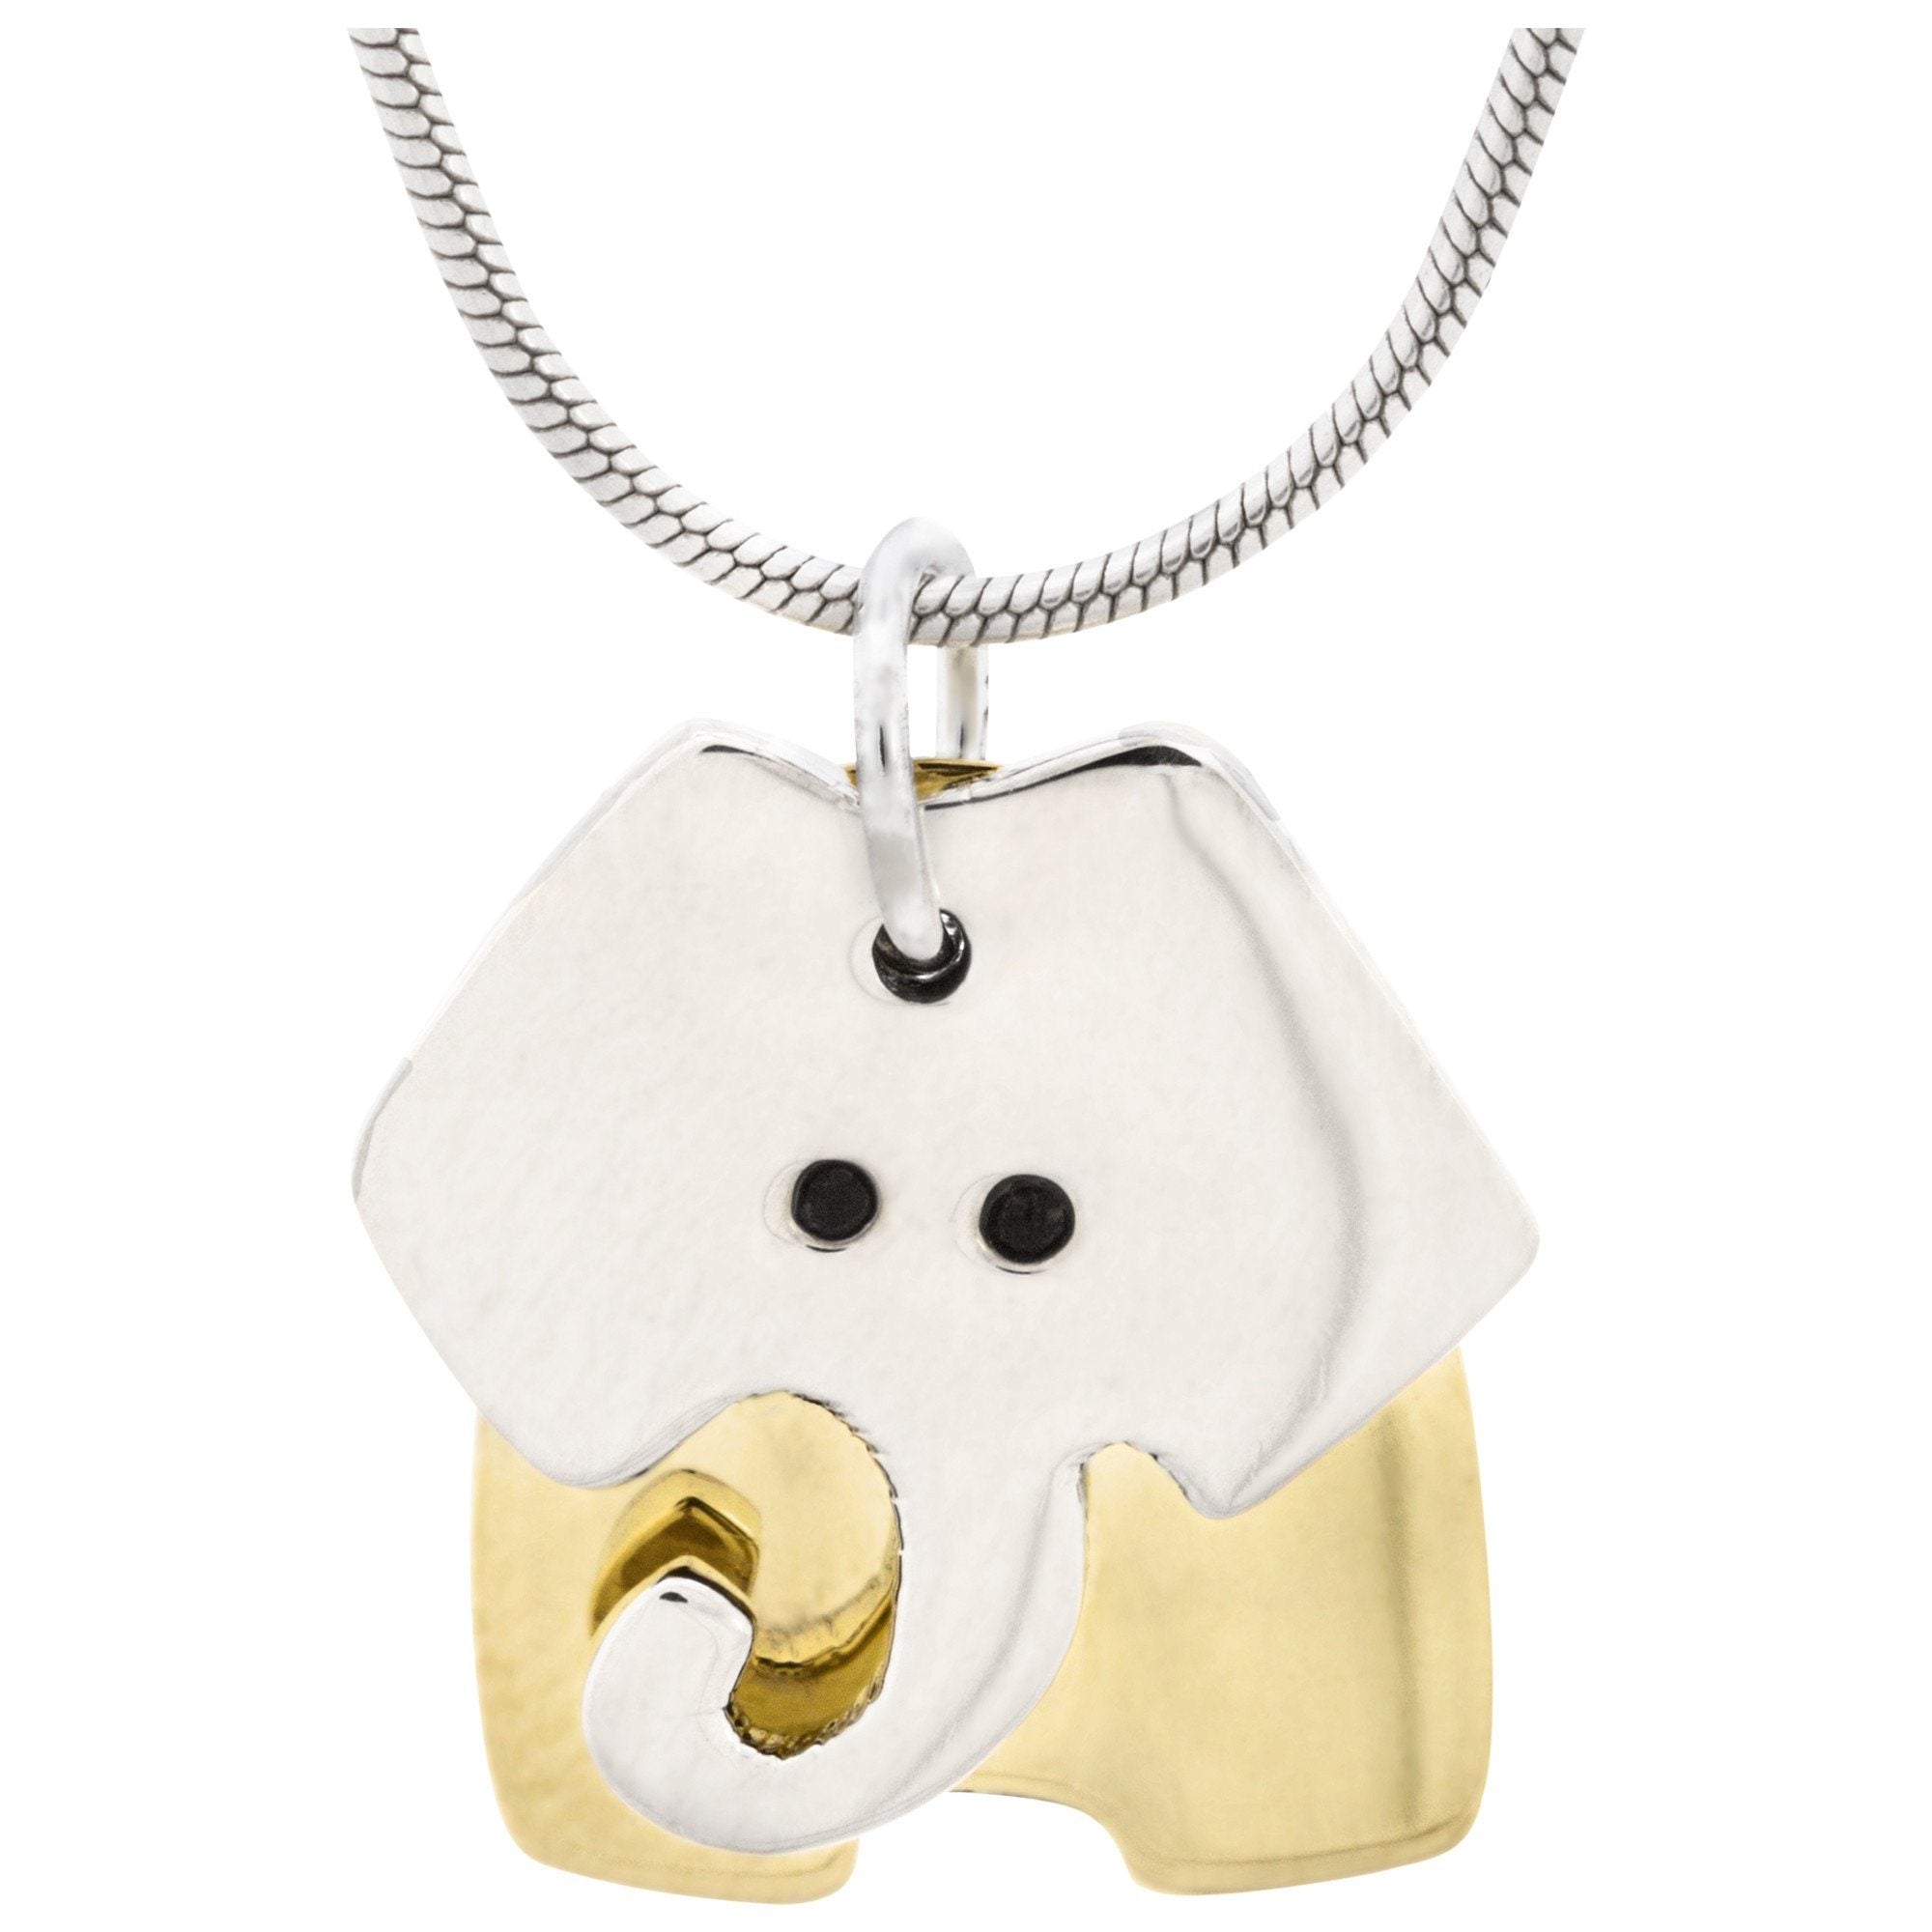 Dancing Elephant Necklace - Pendant Only